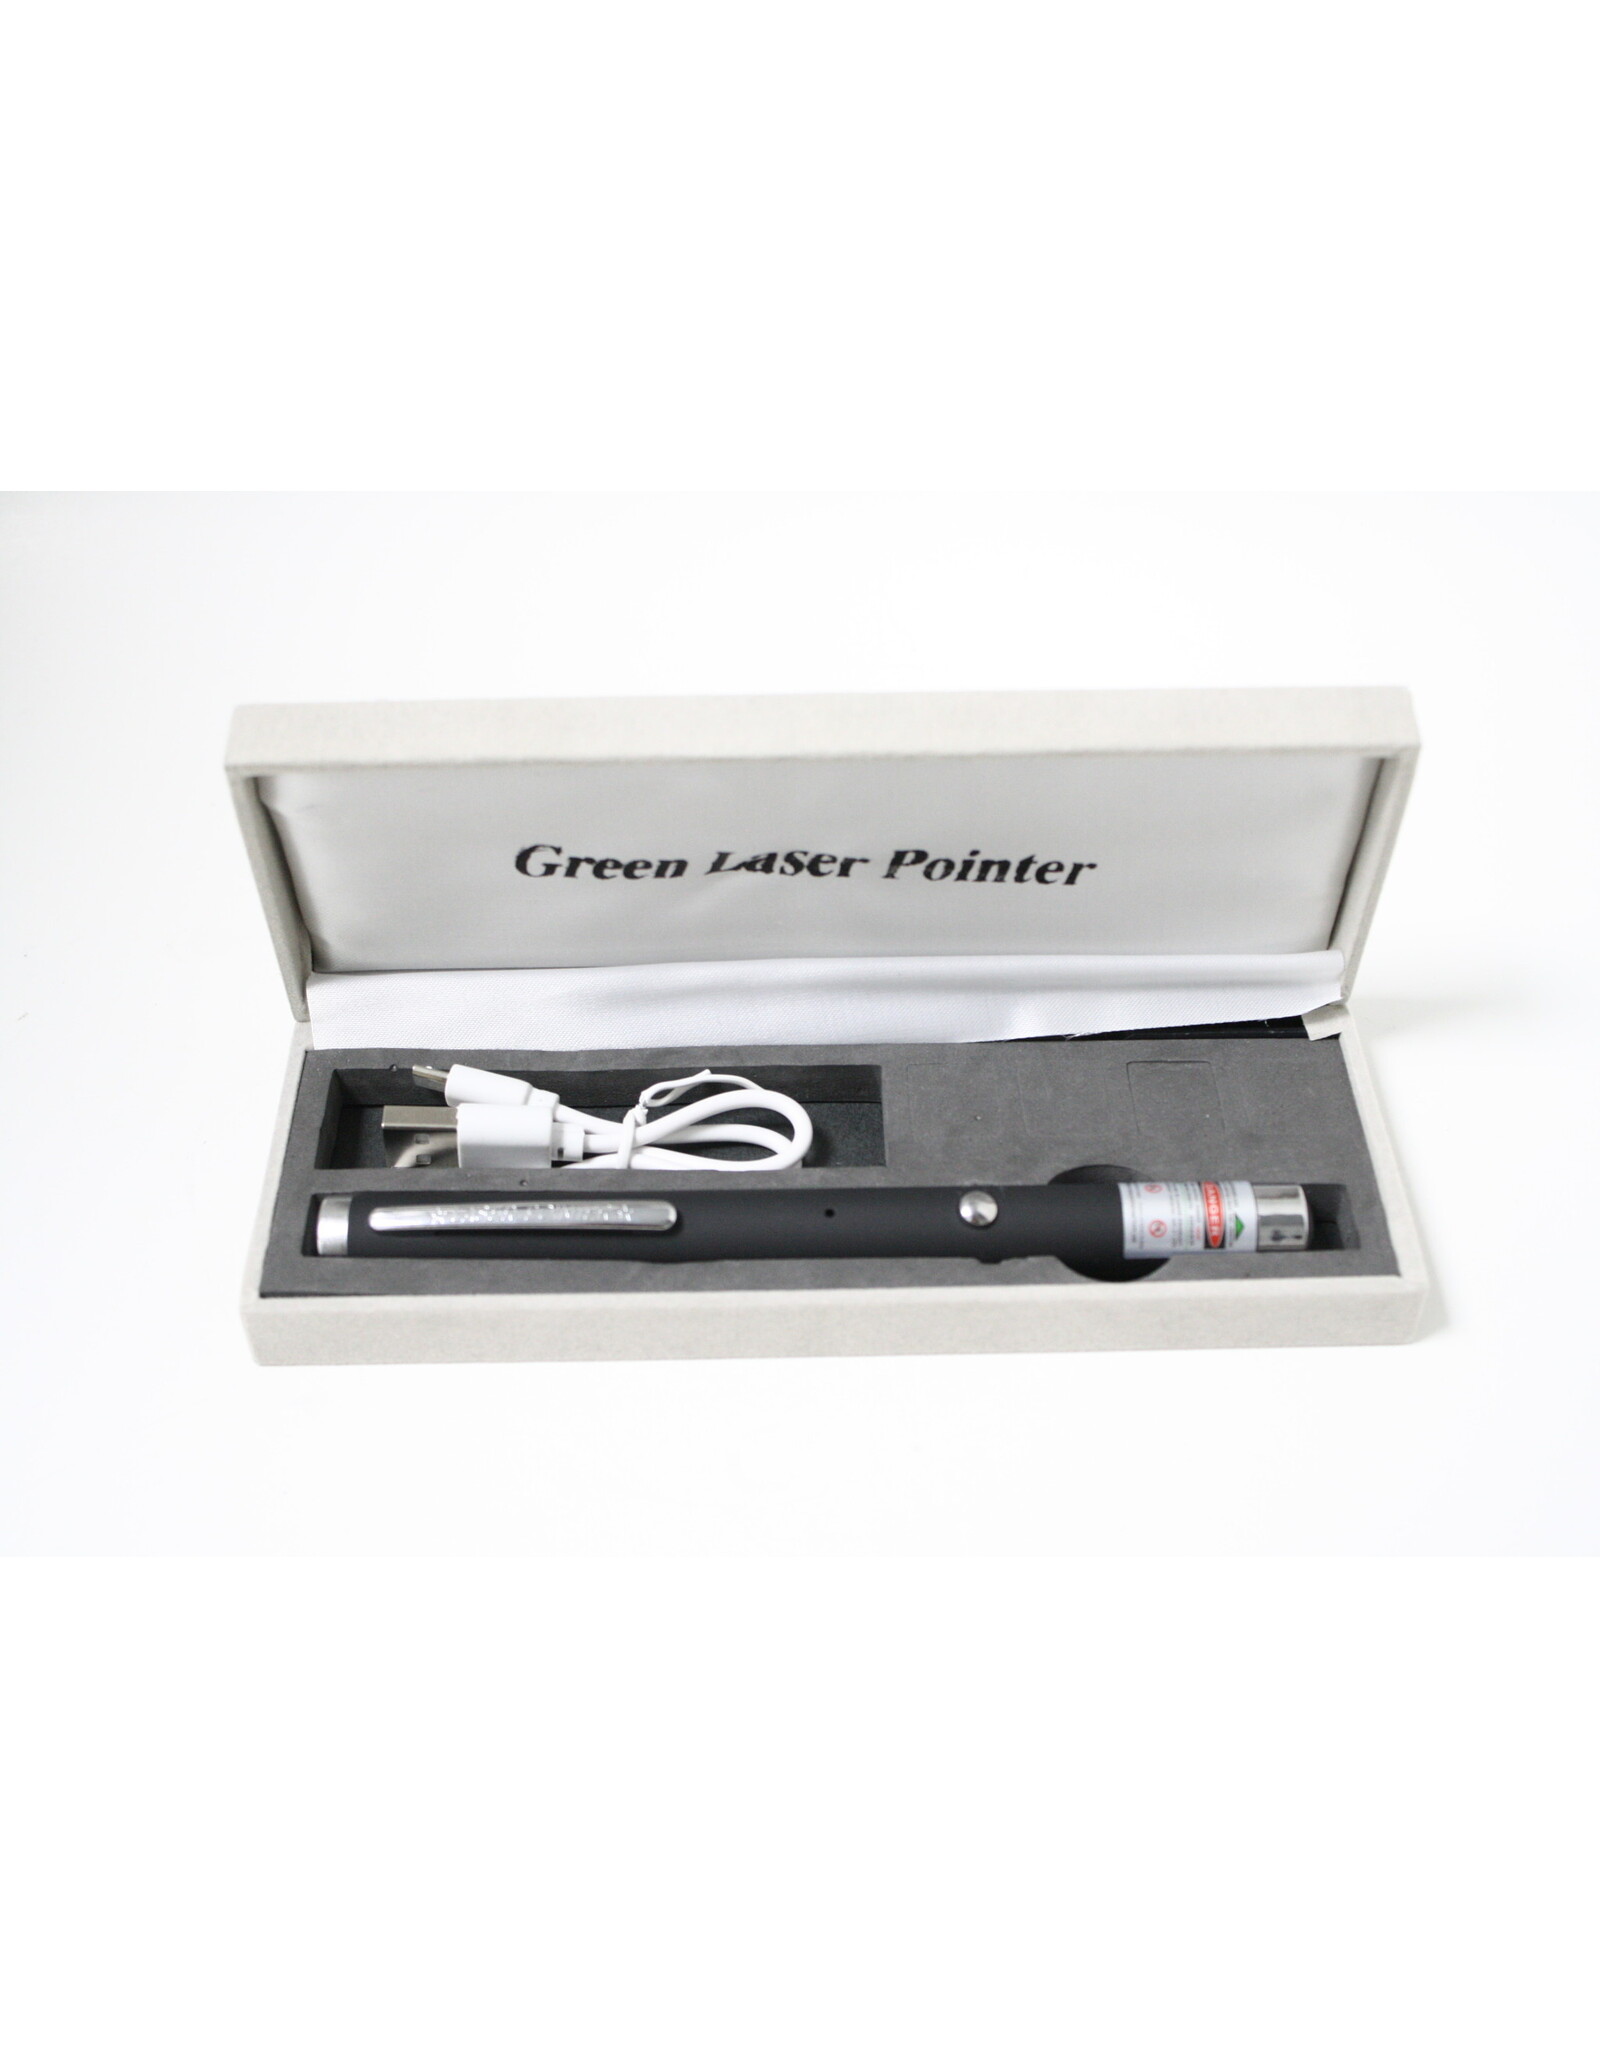 Arcturus Arcturus 50mw Green Laser Pointer (Lithium USB Rechargeable)